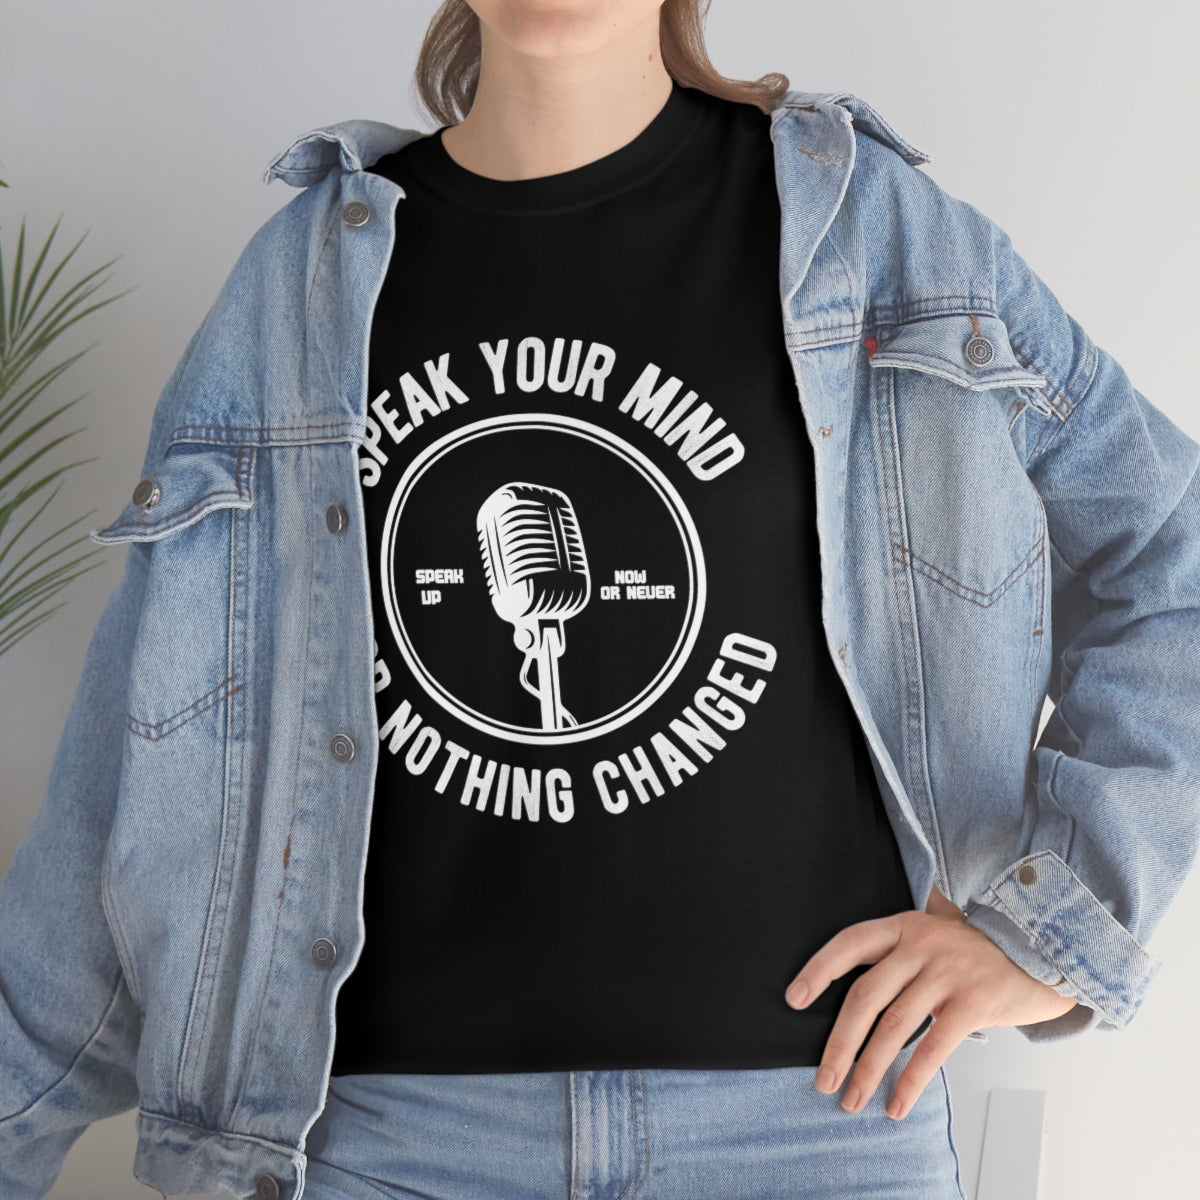 Speak your mind or nothing will change Unisex Heavy Cotton Tee